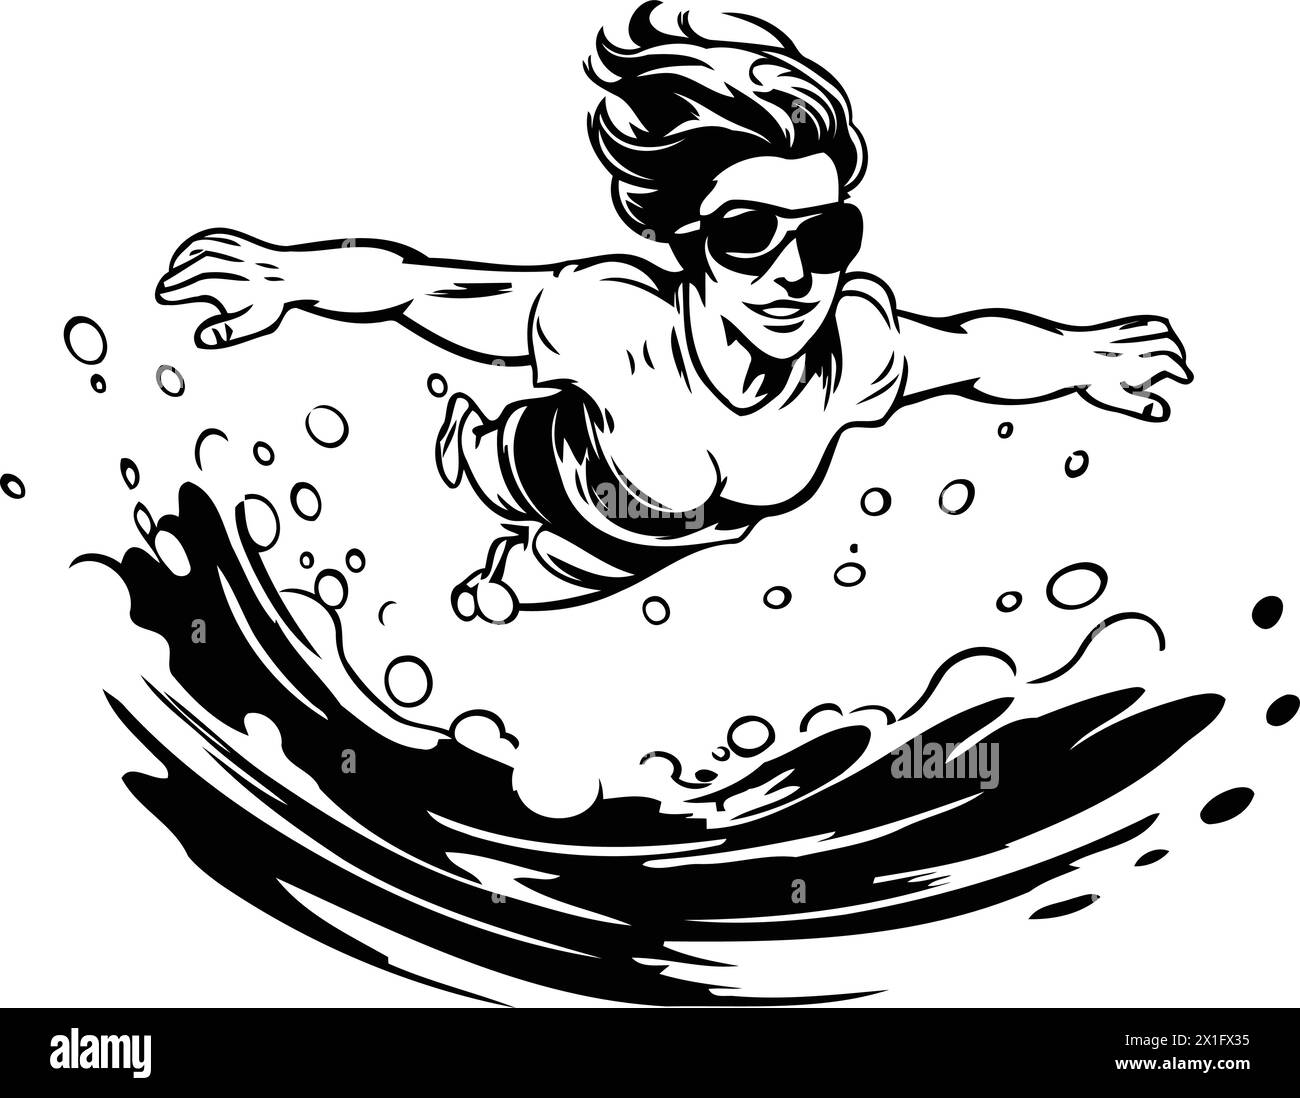 Surfer jumping into the water. Vector illustration isolated on white background. Stock Vector